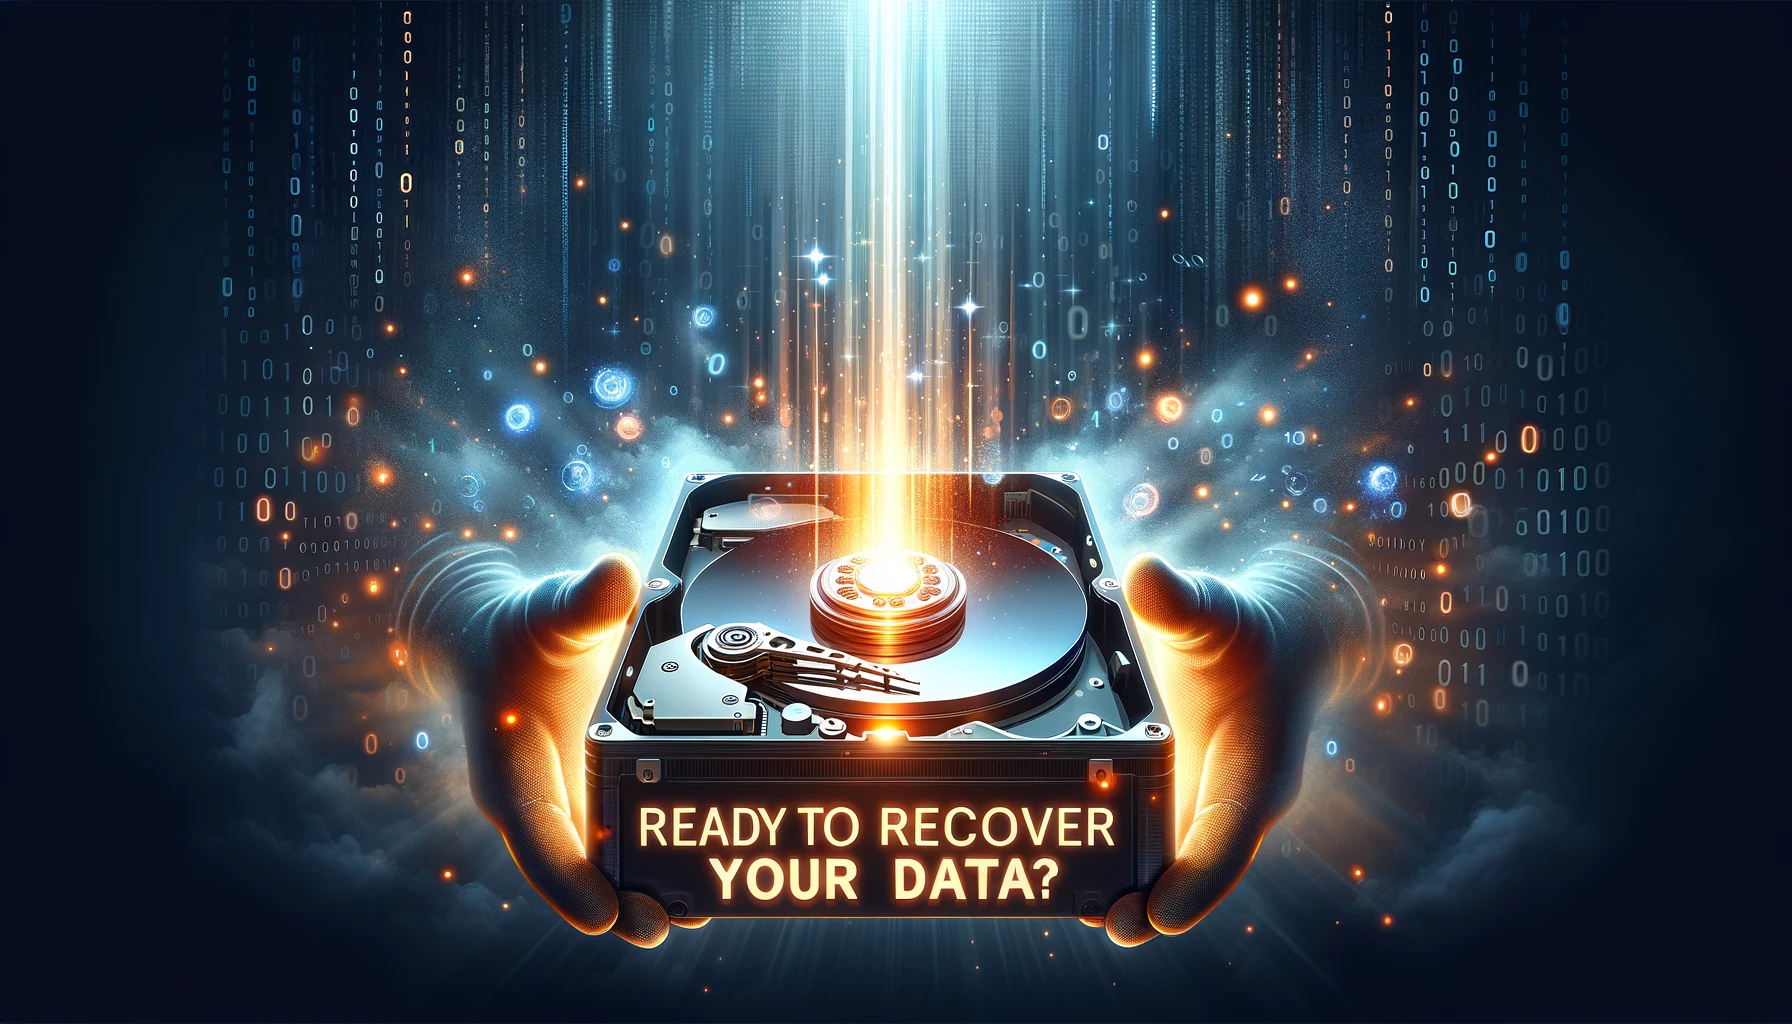 A hard drive bathed in bright light, with digital data particles flowing into it, posing the question 'Ready to Recover Your Data